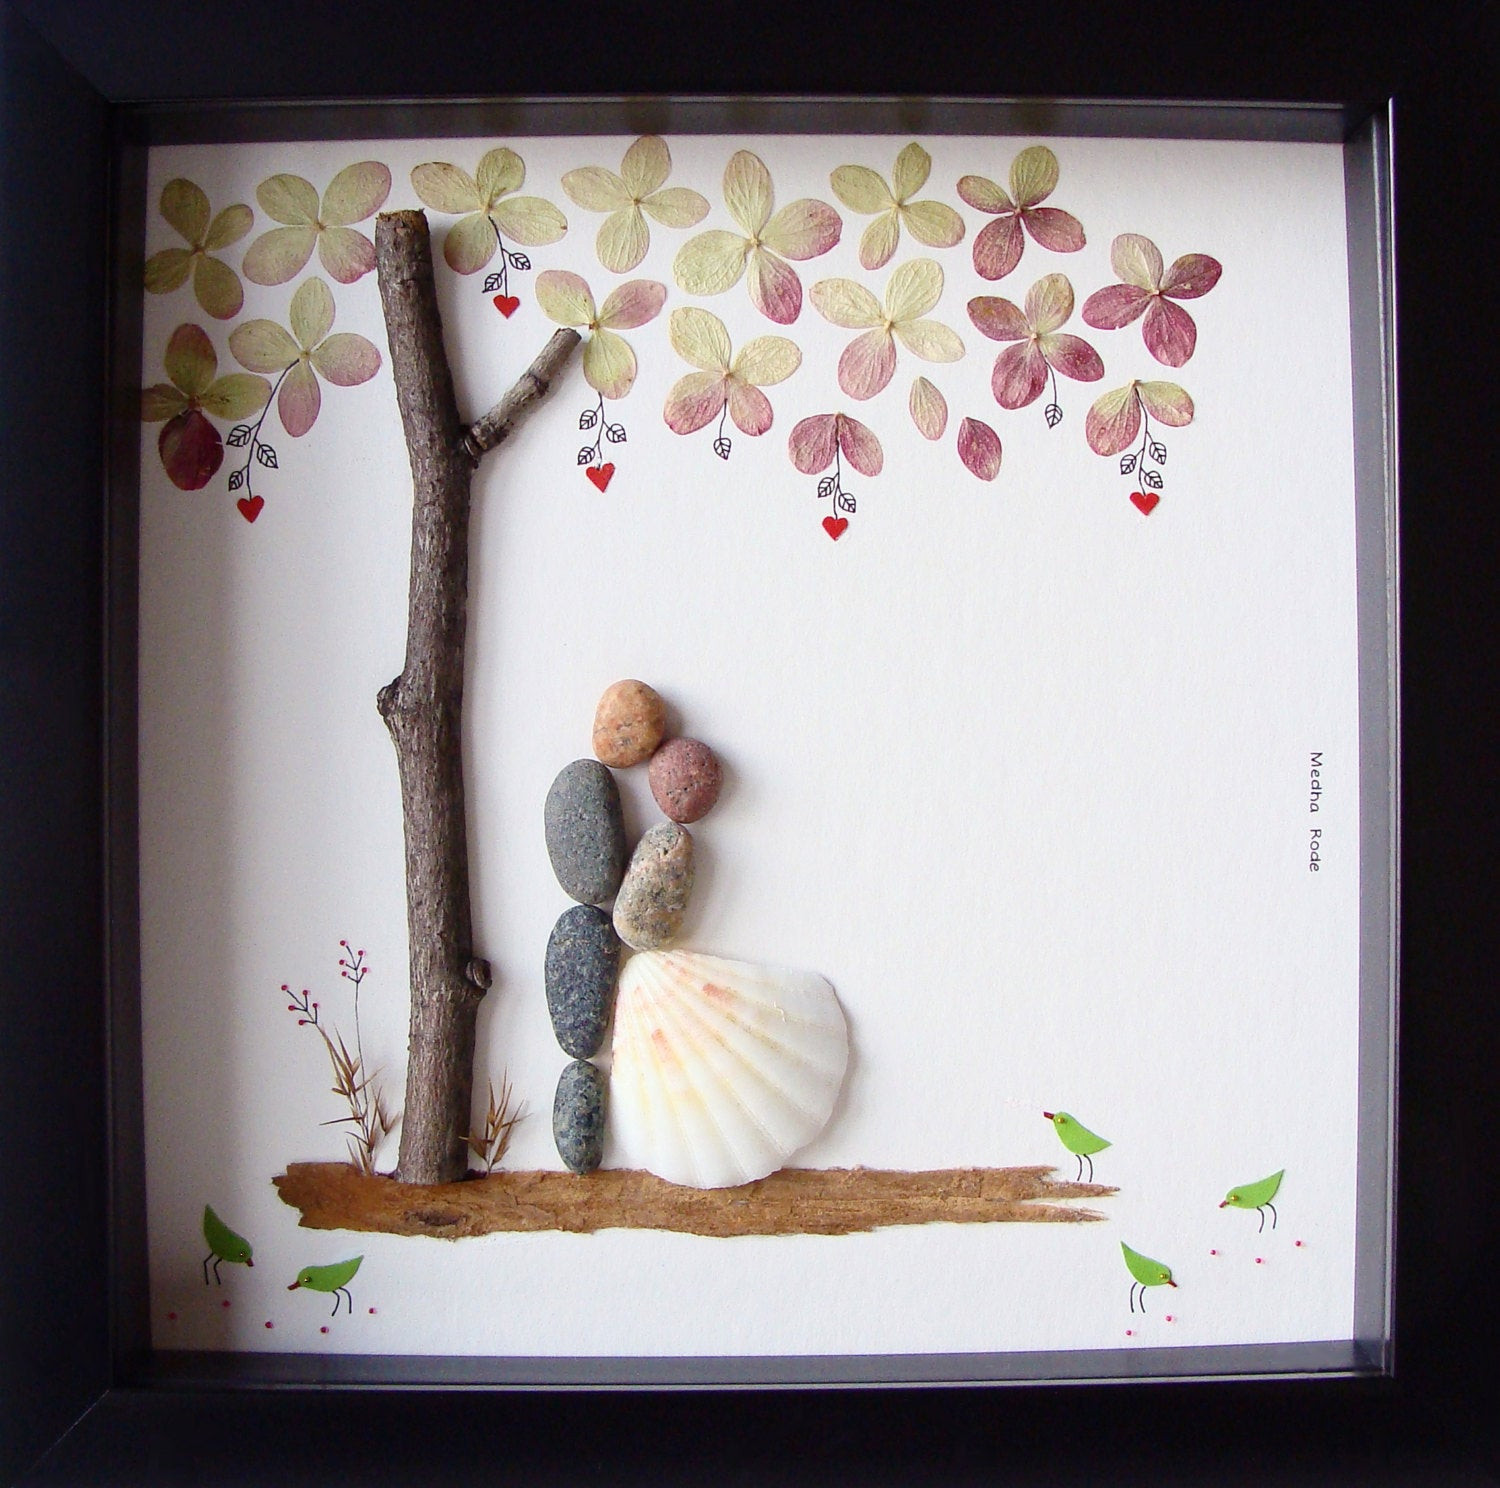 Ideas For A Wedding Gift
 Unique Wedding Gift For Couple Wedding Pebble Art by MedhaRode